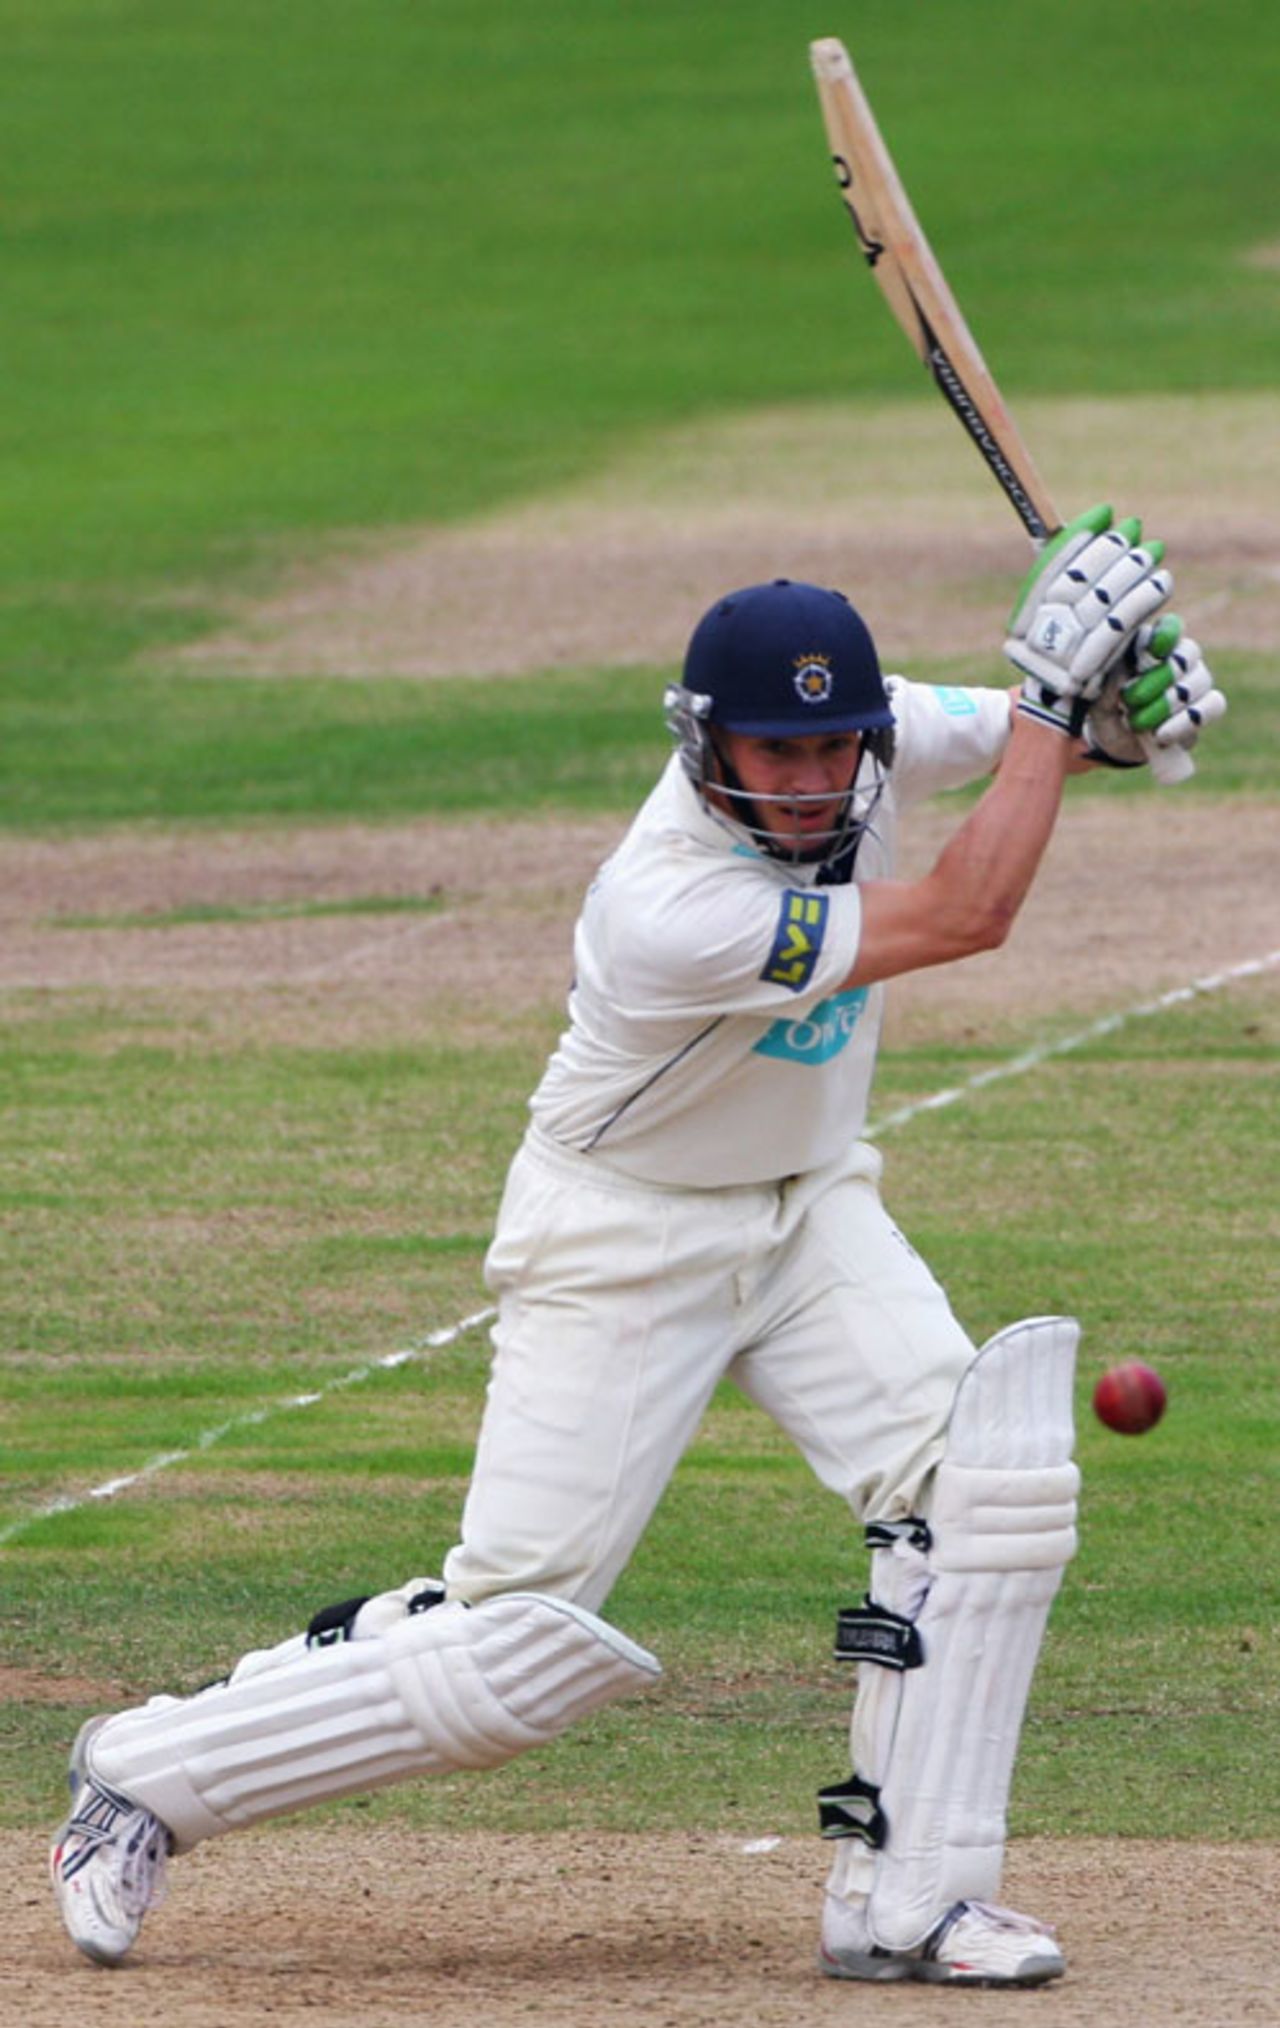 Michael Brown drives through the covers, Nottinghamshire v Hampshire, County Championship, September 25, 2008